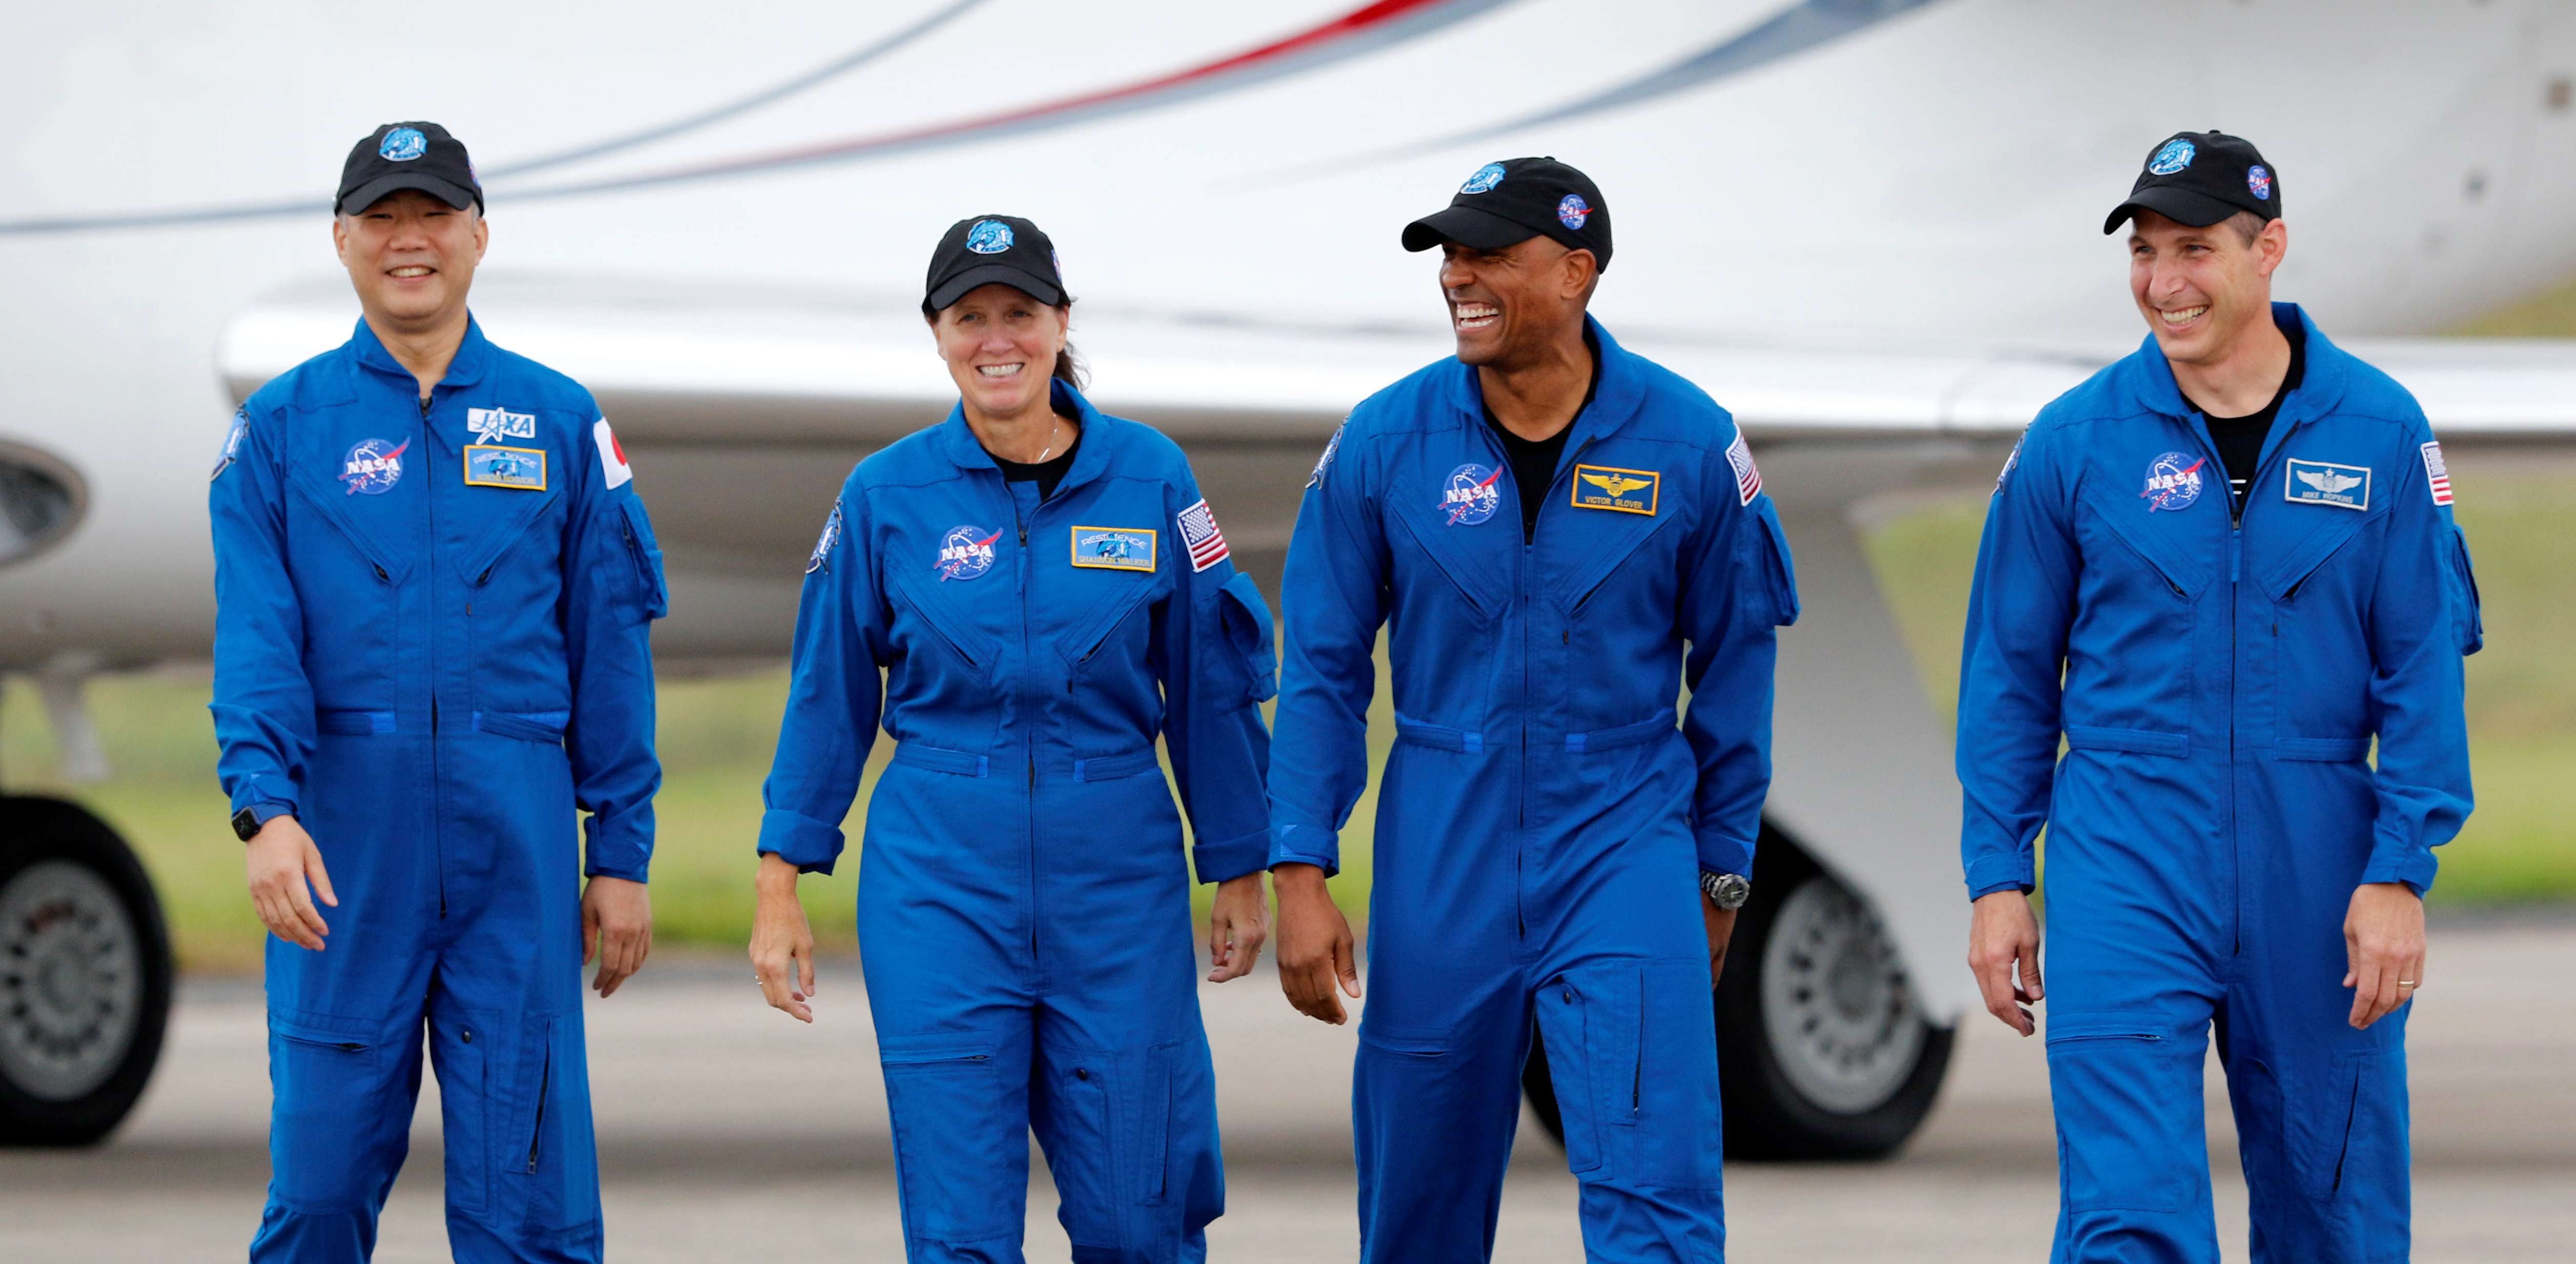 NASA astronauts Shannon Walker, Victor Glover, Mike Hopkins, and JAXA (Japan Aerospace Exploration Agency) astronaut Soichi Noguchi, who comprise Crew-1, walk at Kennedy Space Center ahead of the NASA/SpaceX launch of the first operational commercial crew mission in Cape Canaveral, Florida. Credit: Reuters